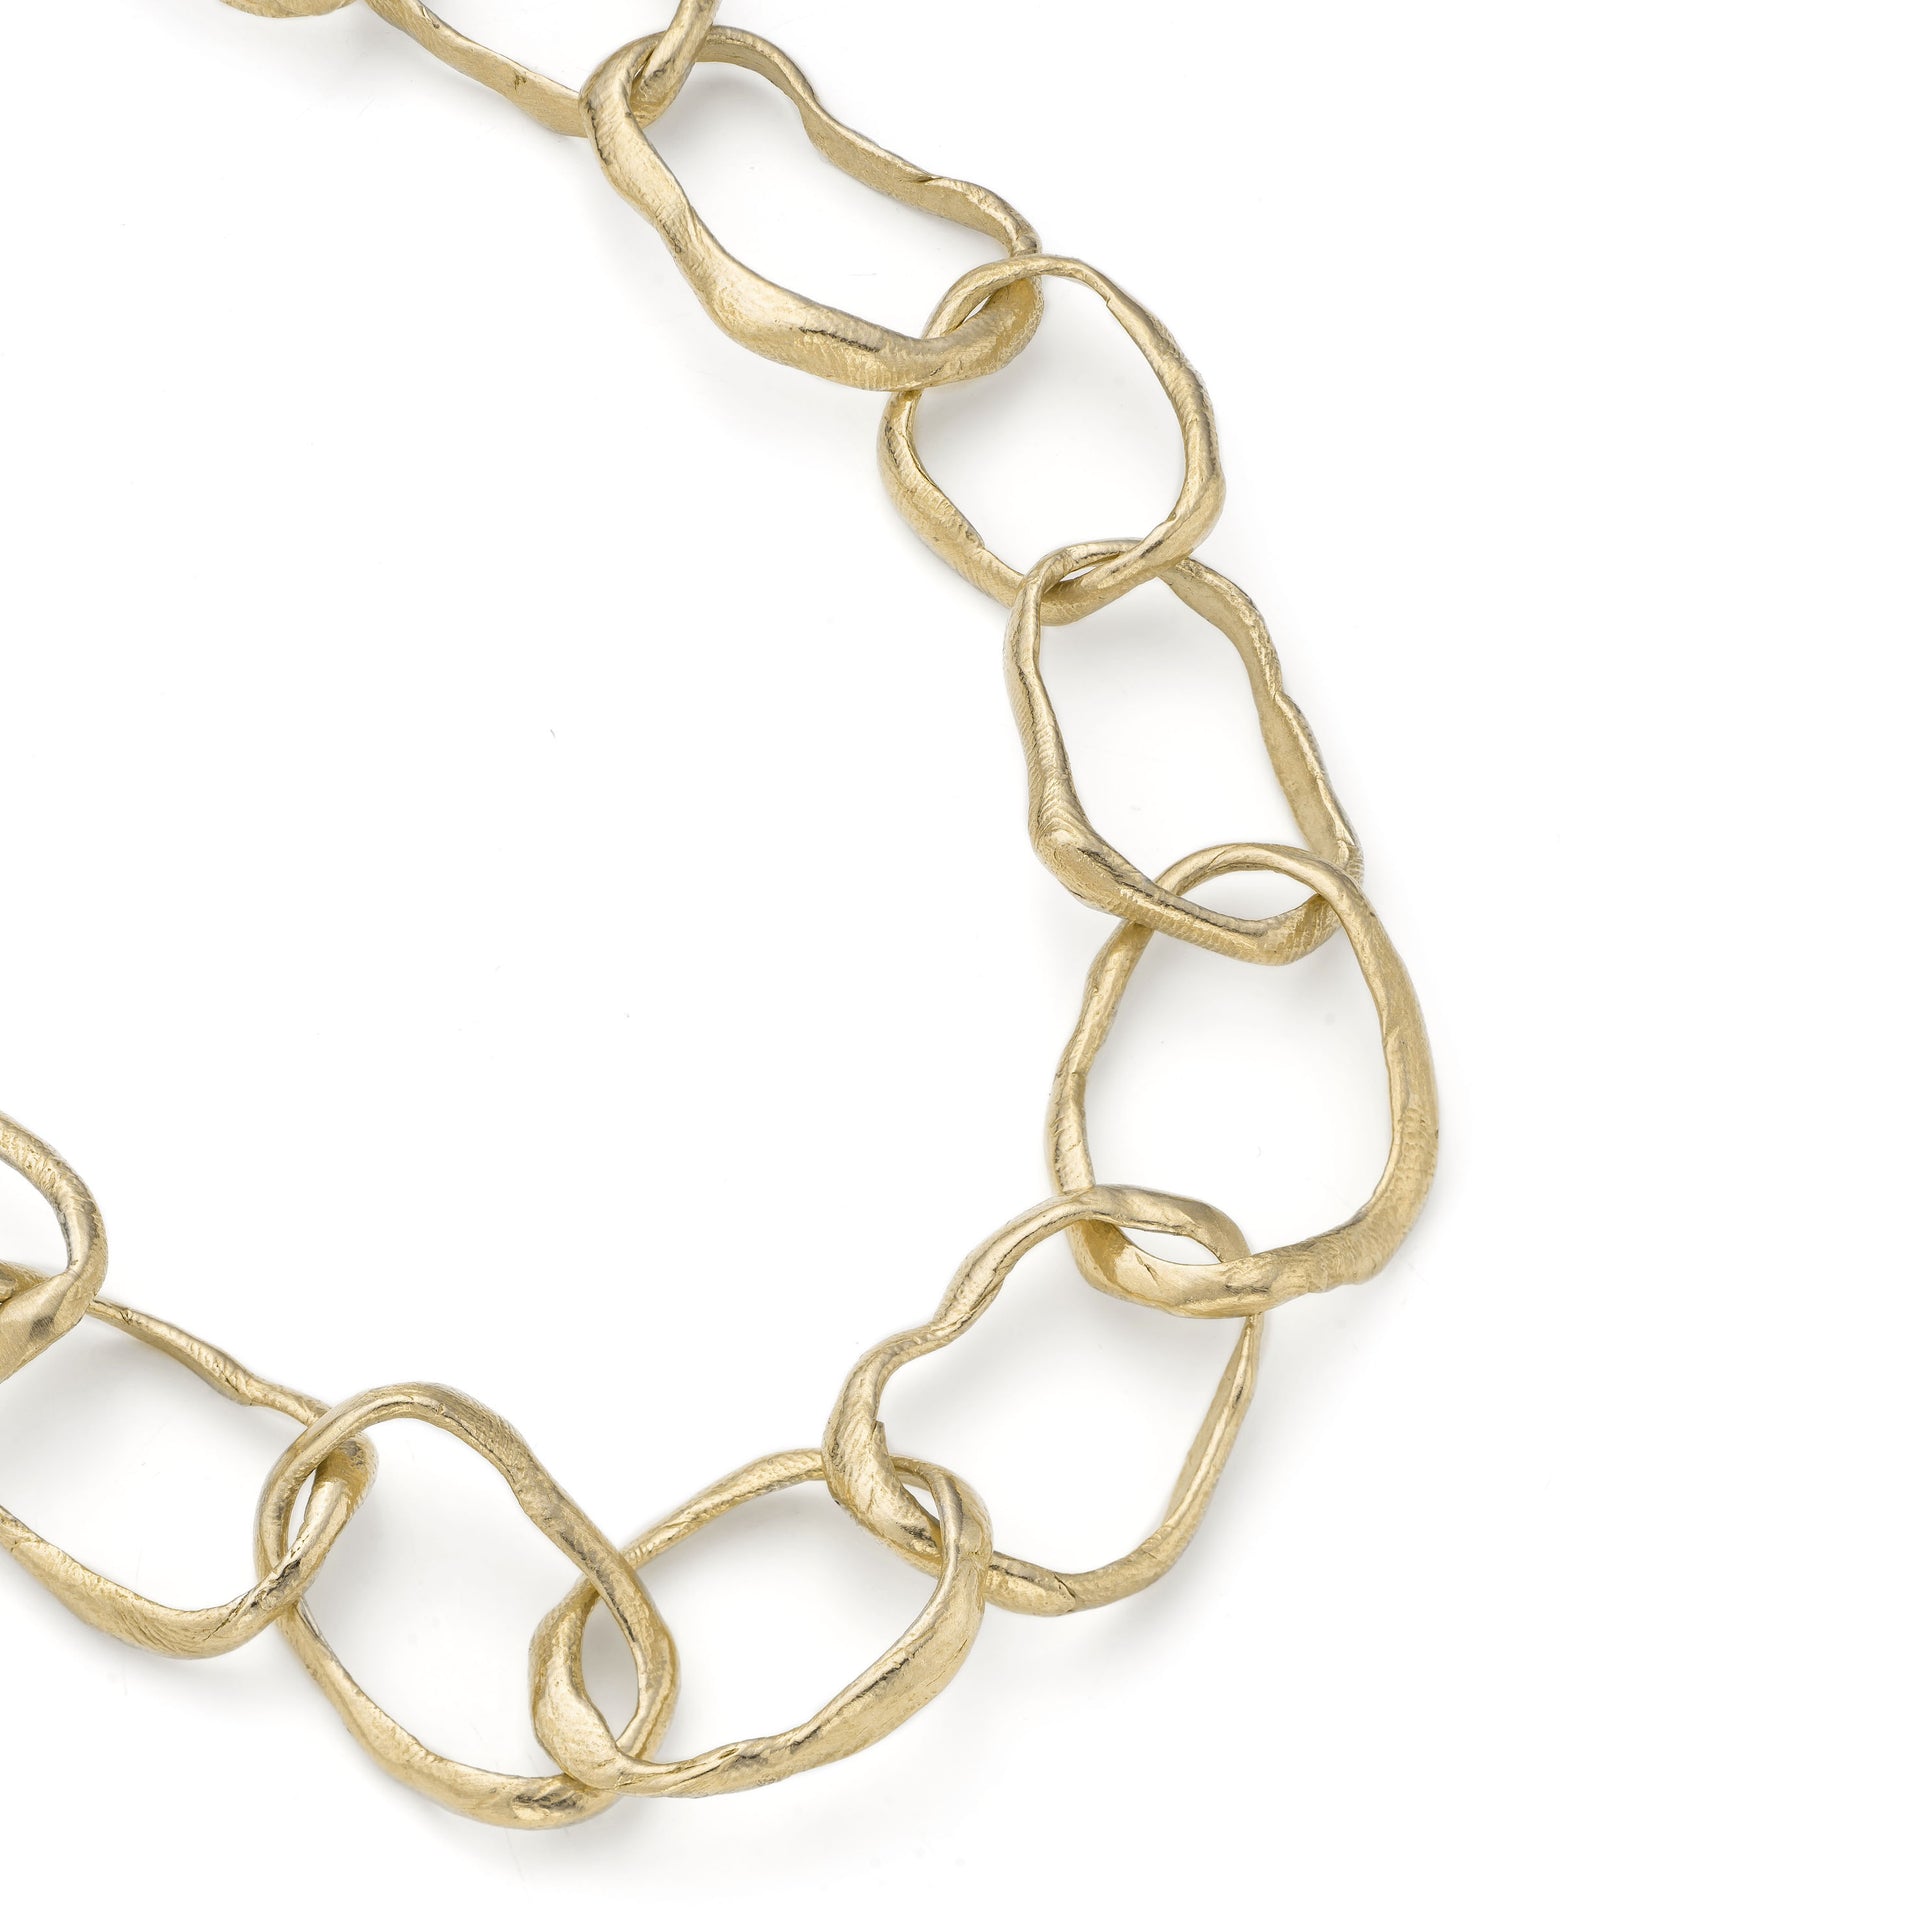 Detail of the hand crafted, irregular, solid gold links that make up the chain in Emily Nixon's Stone Drawing Necklace. Each link has been handmade to be different. The gold chain links retain a lustre without being overly shiny. Tactile and utterly wearable, a relaxed gold necklace to put on everyday by Cornwall jewellery designer Emily Nixon.